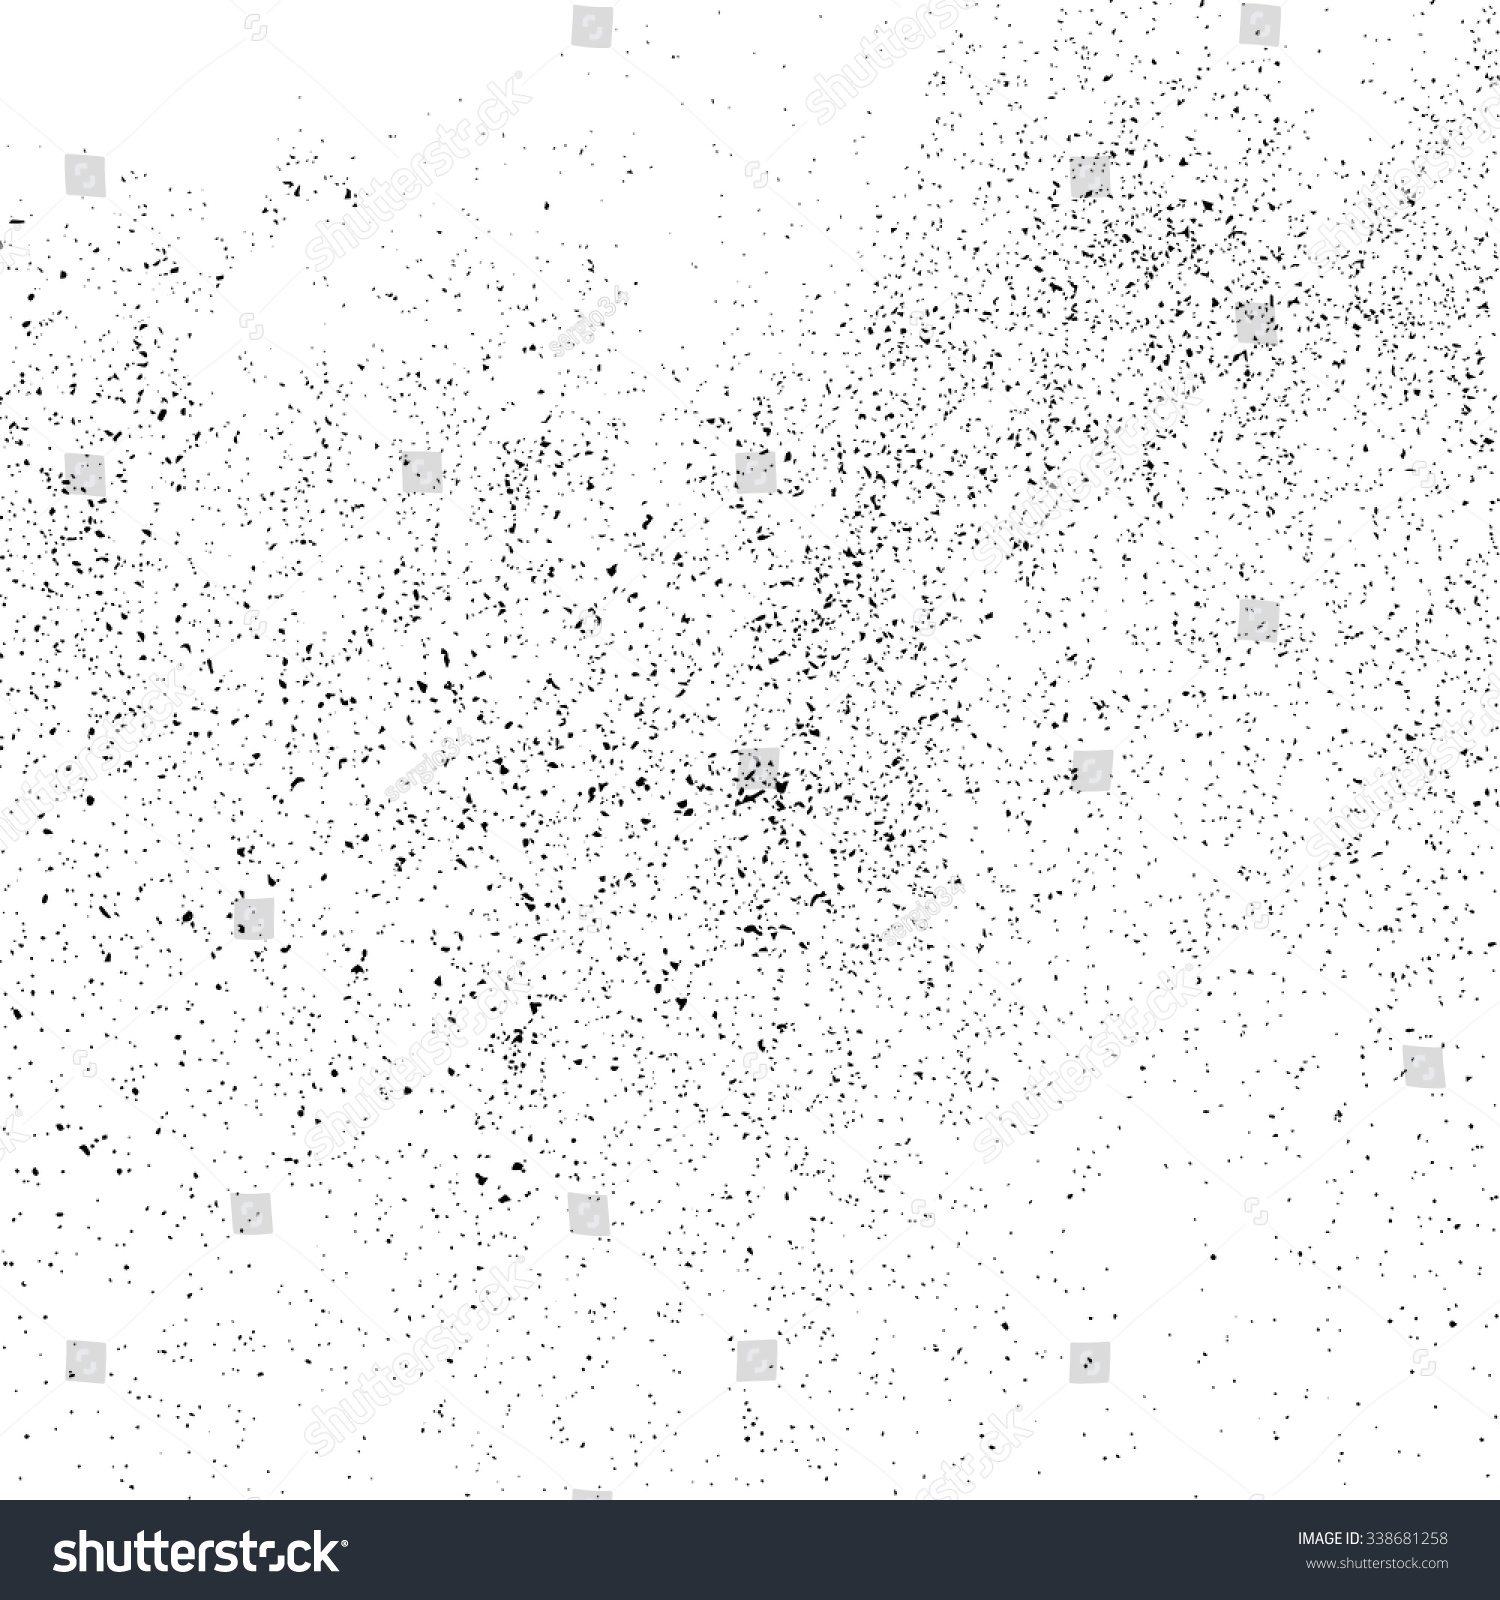 Grainy abstract  texture on a white background. Design element. Vector illustration,eps 10. #338681258